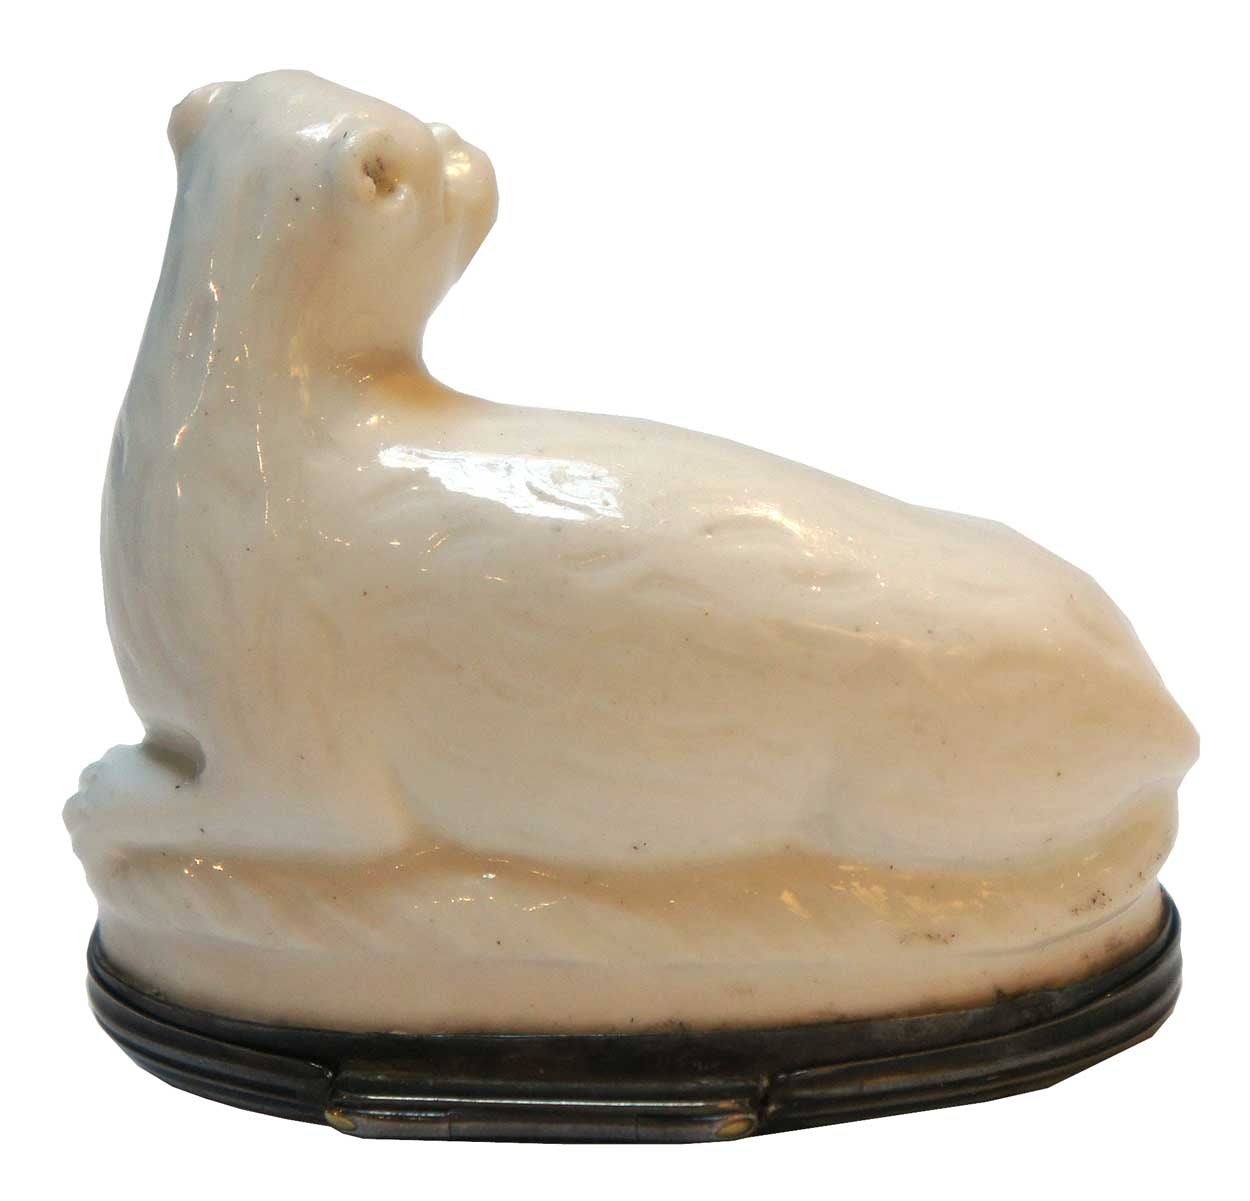 Attributed to Mennecy (France, circa 1730-1806).
An antique, soft paste porcelain pug dog form bonbonnière all in white. This form of box was used for the storage of sweets to perfume the breath in the 18th century. This example has an oval base